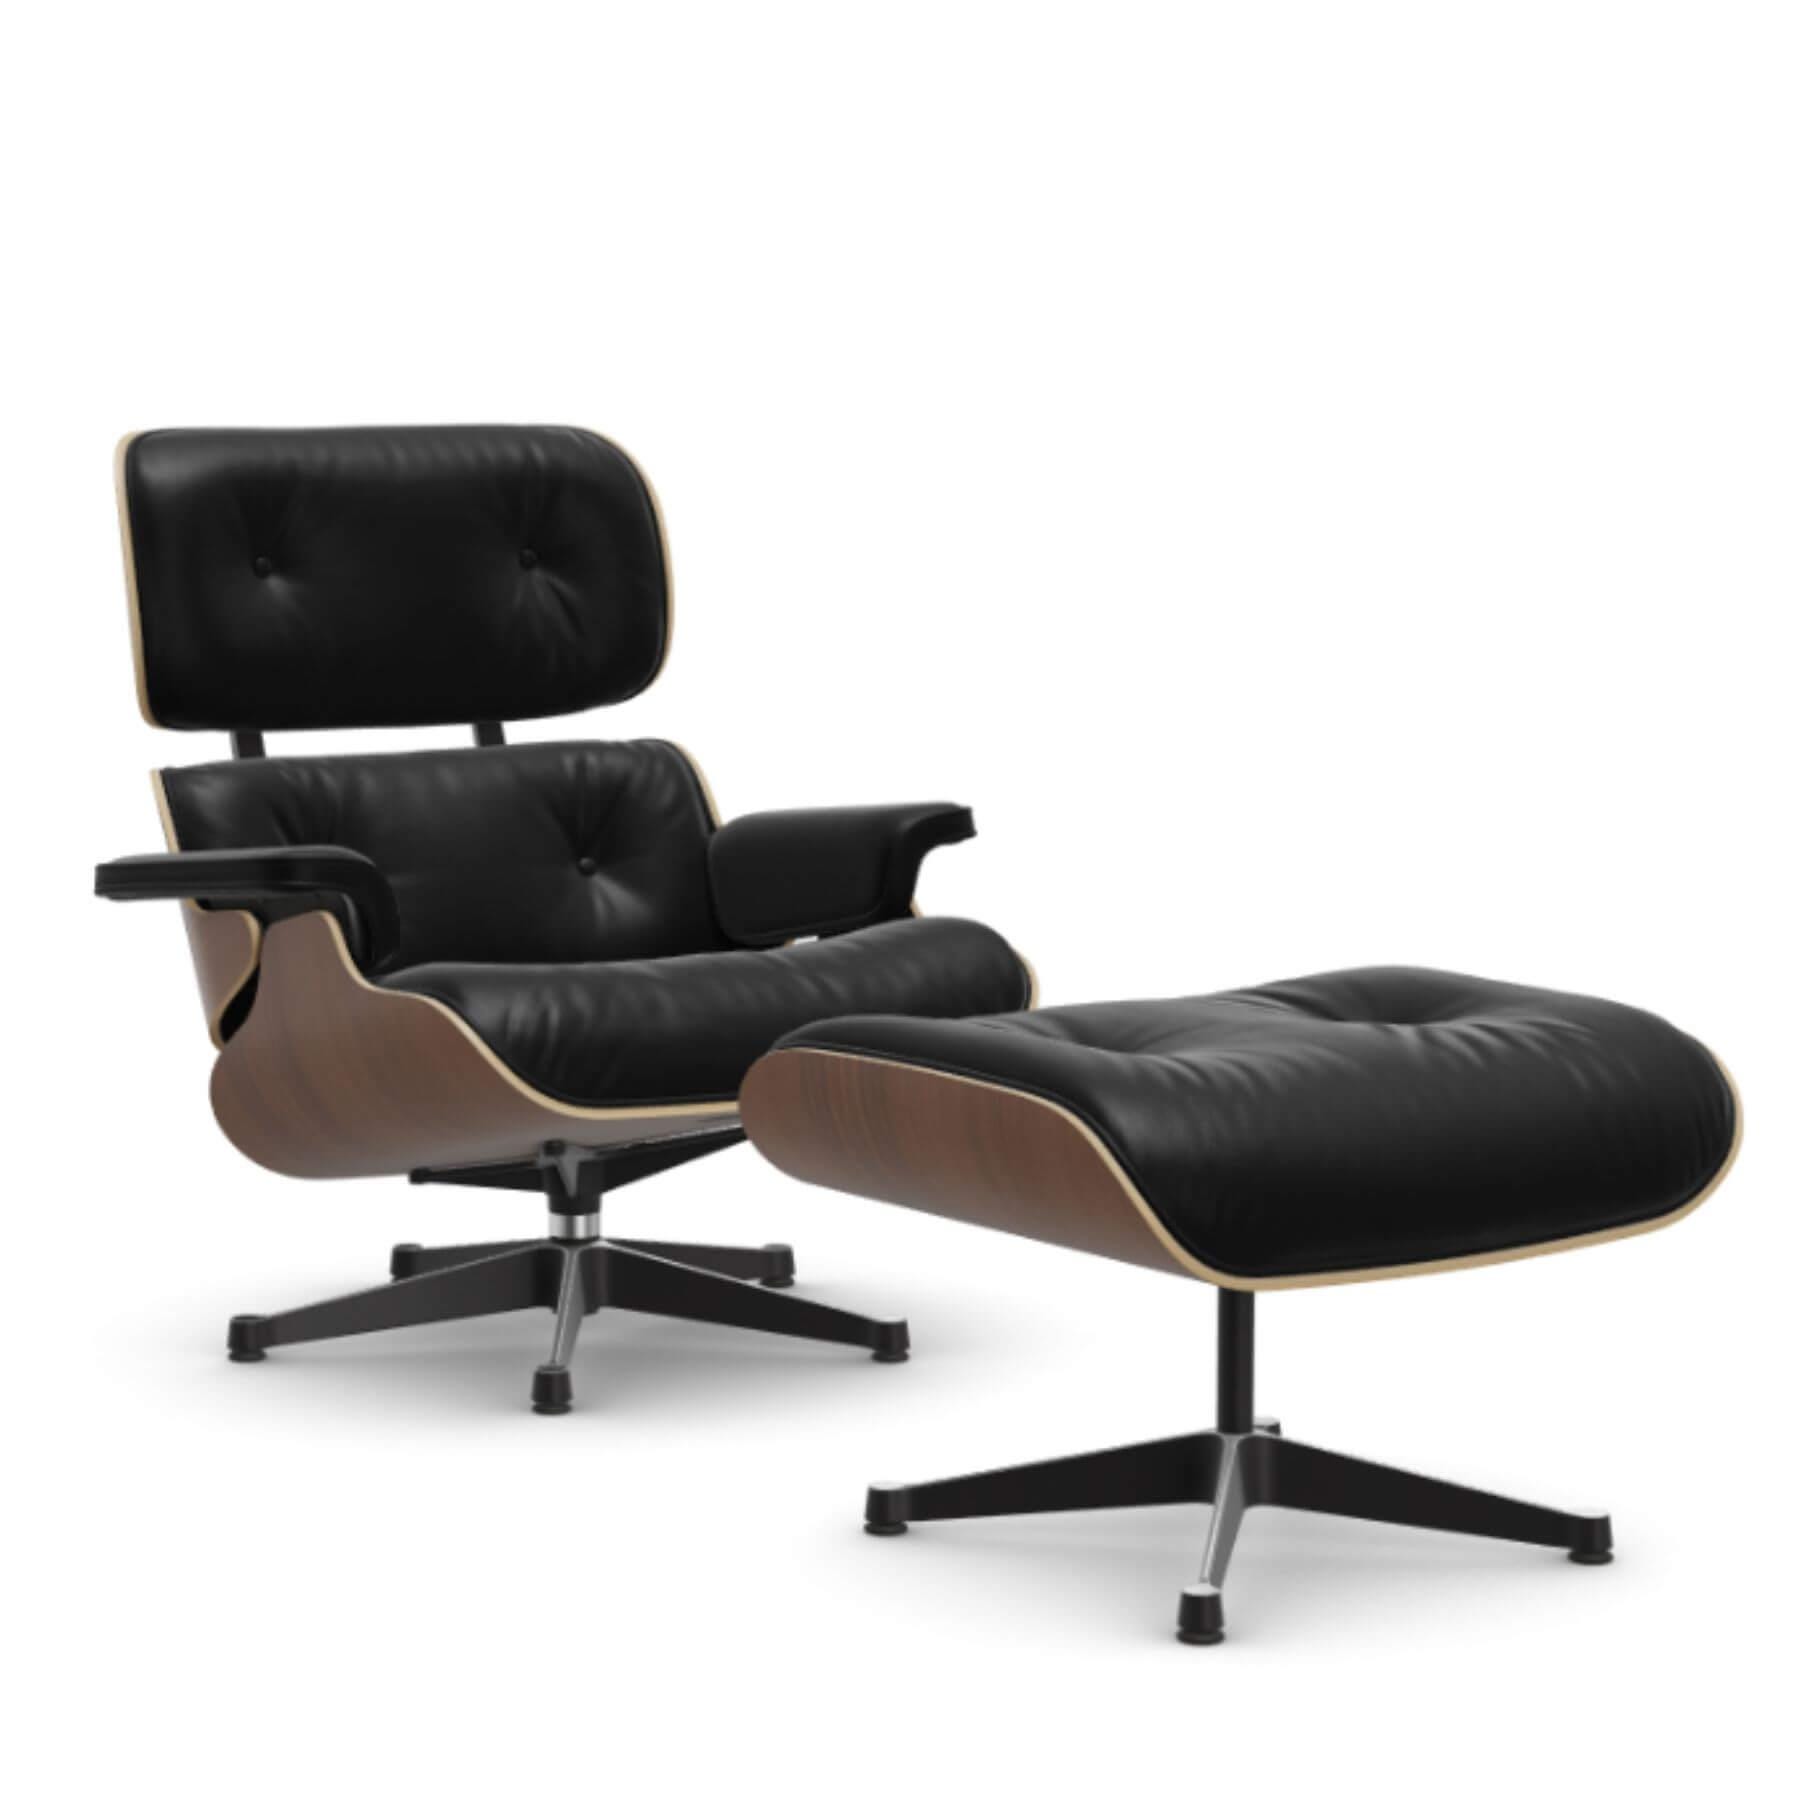 Vitra Eames Classic Lounge Chair Black Pigmented Walnut Leather Natural F Nero Polished Black With Ottoman Dark Wood Designer Furniture From Hollo